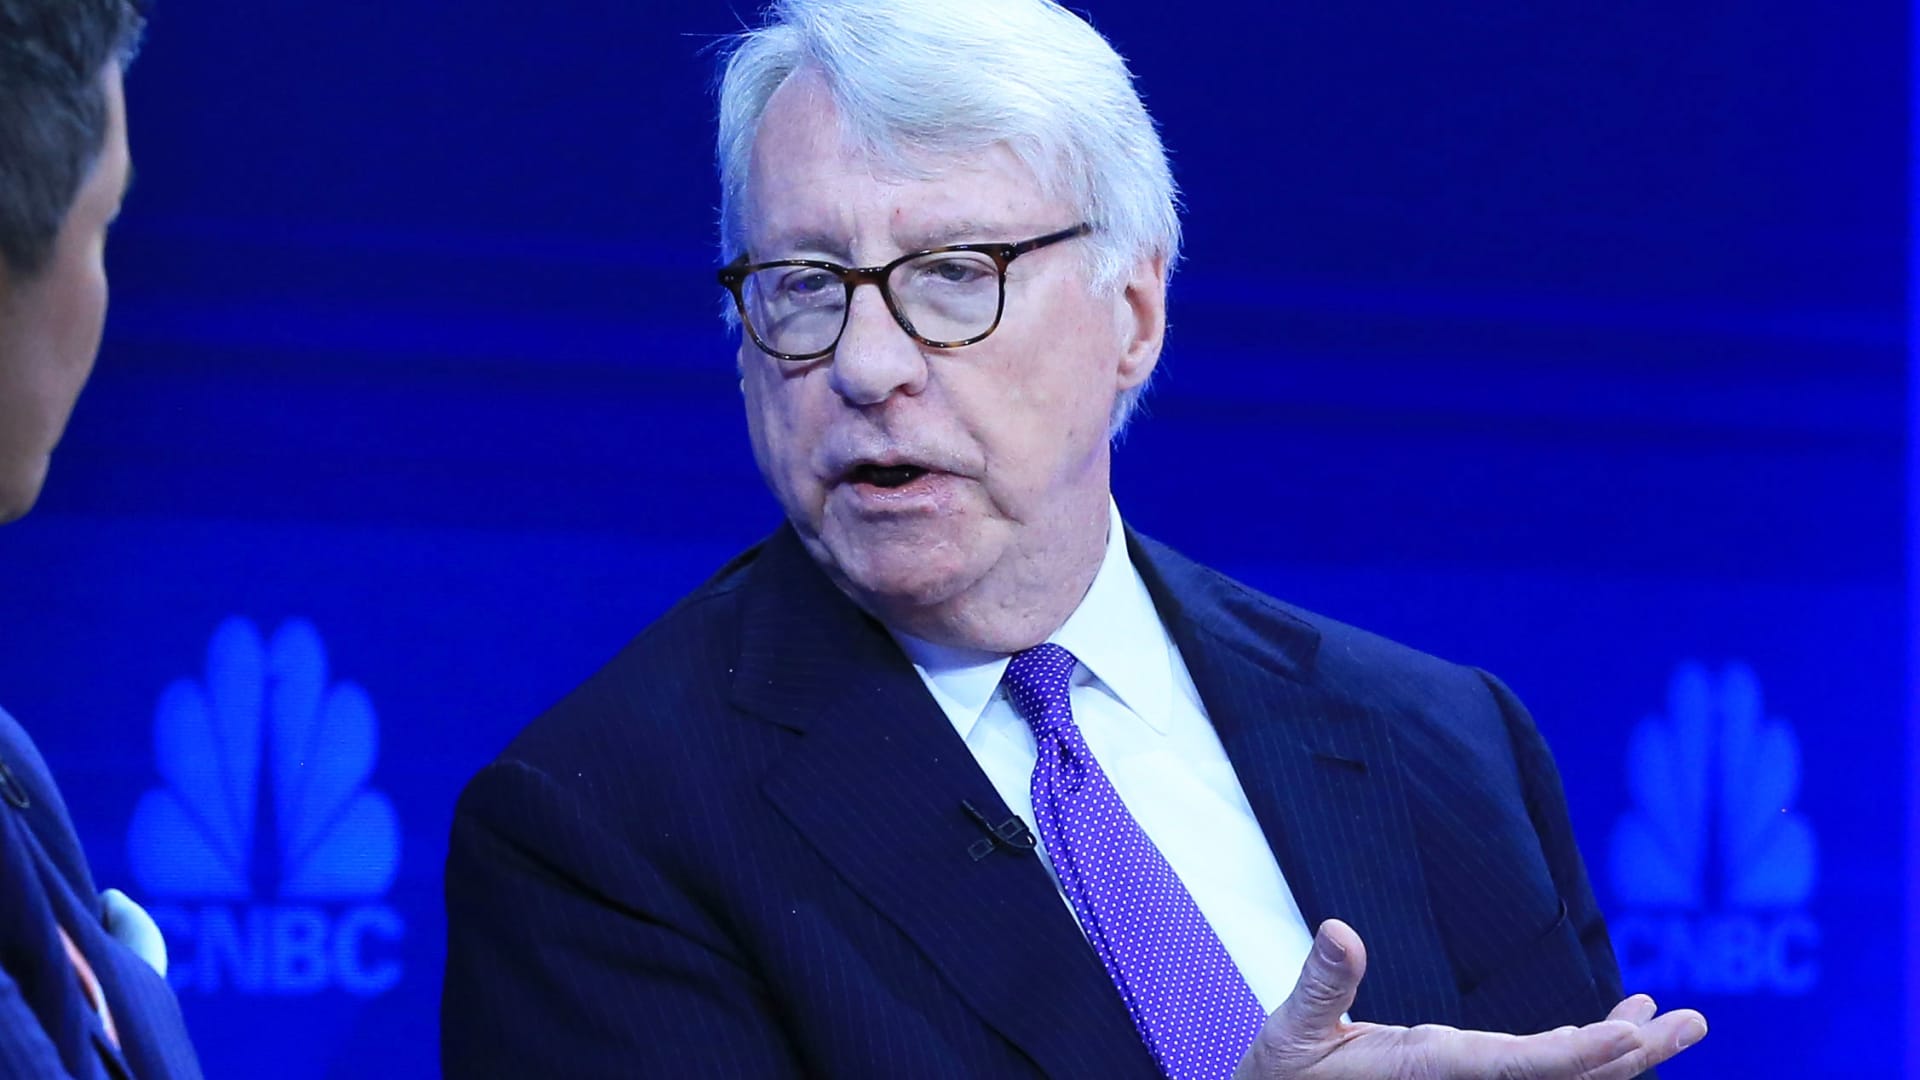 Jim Chanos, the short seller who called Enron’s fall, is converting hedge fund to a family office